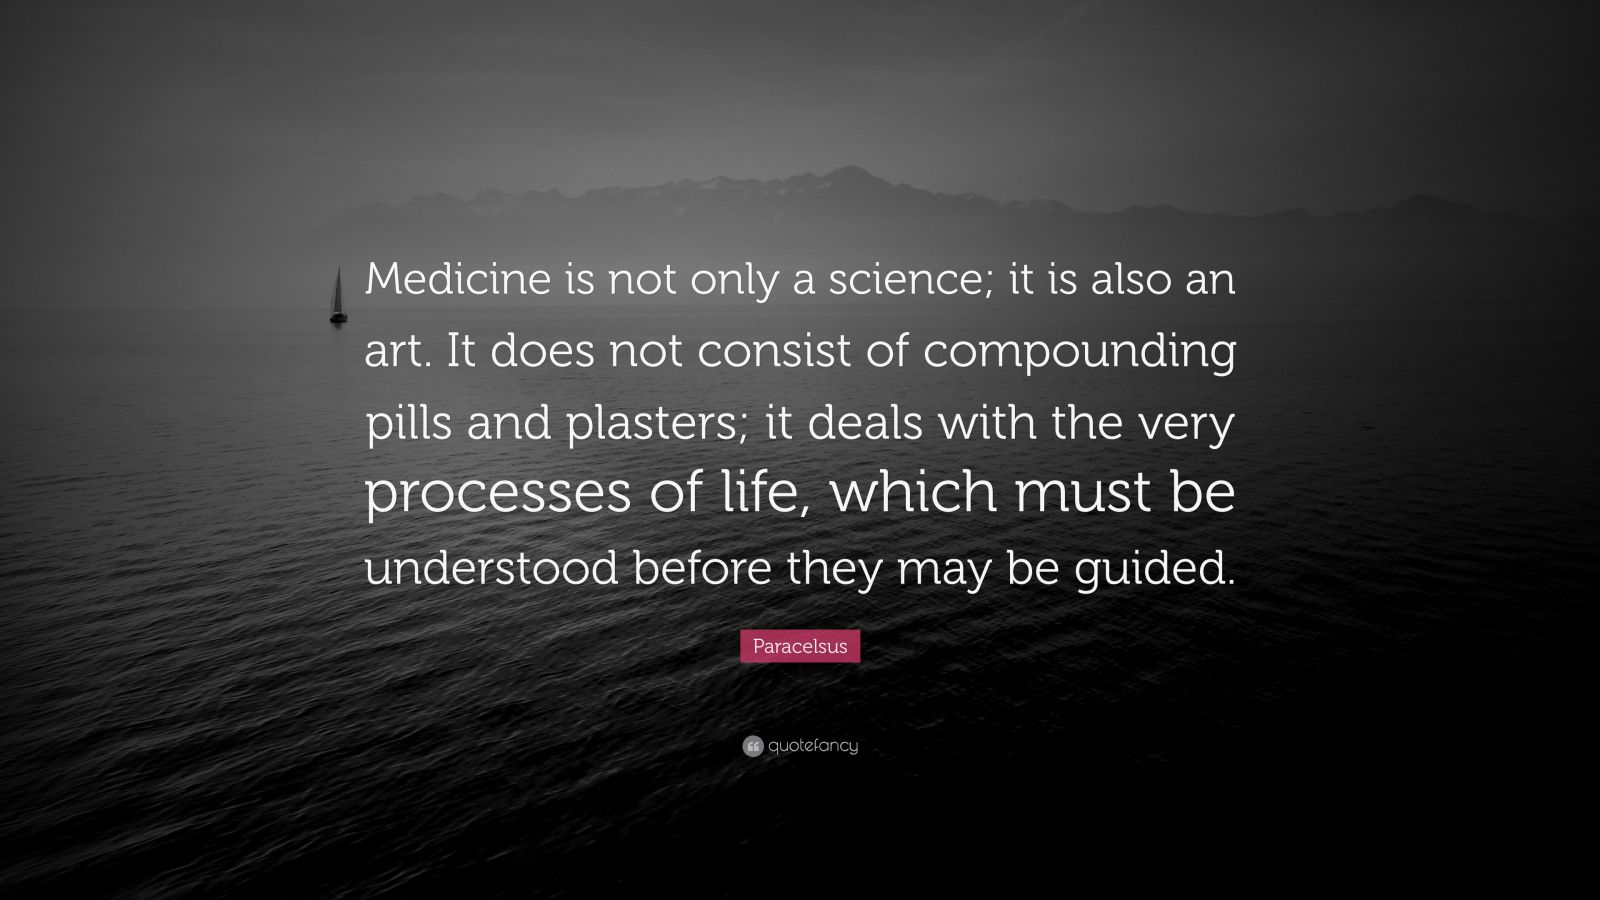 Paracelsus Quote “Medicine is not only a science; it is